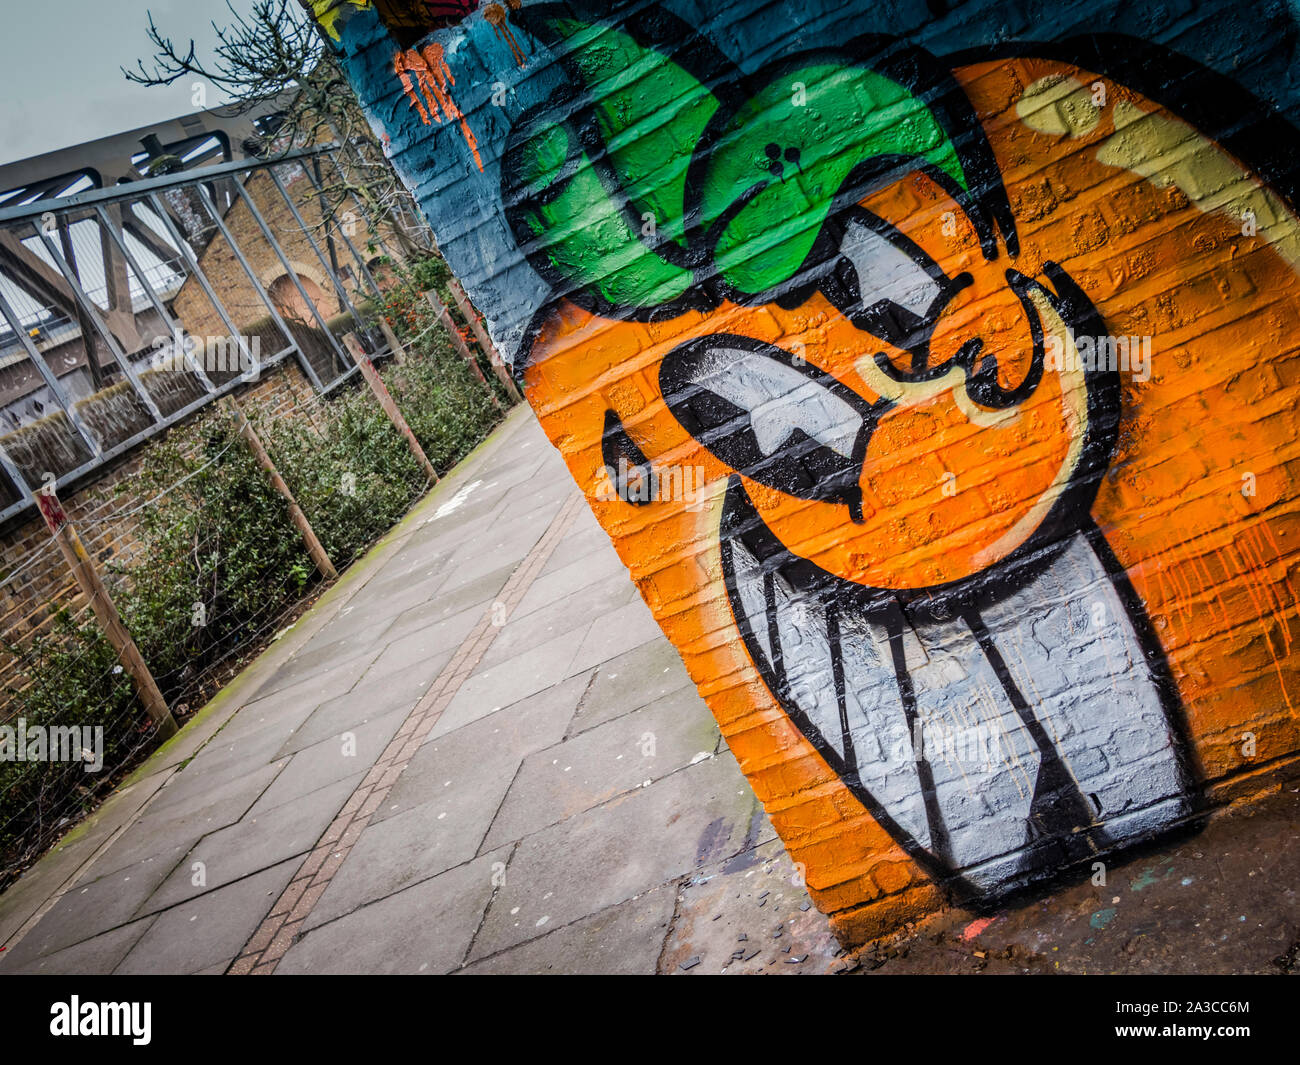 graffiti on the walls in and around Brick Lane in London's East End. Stock Photo